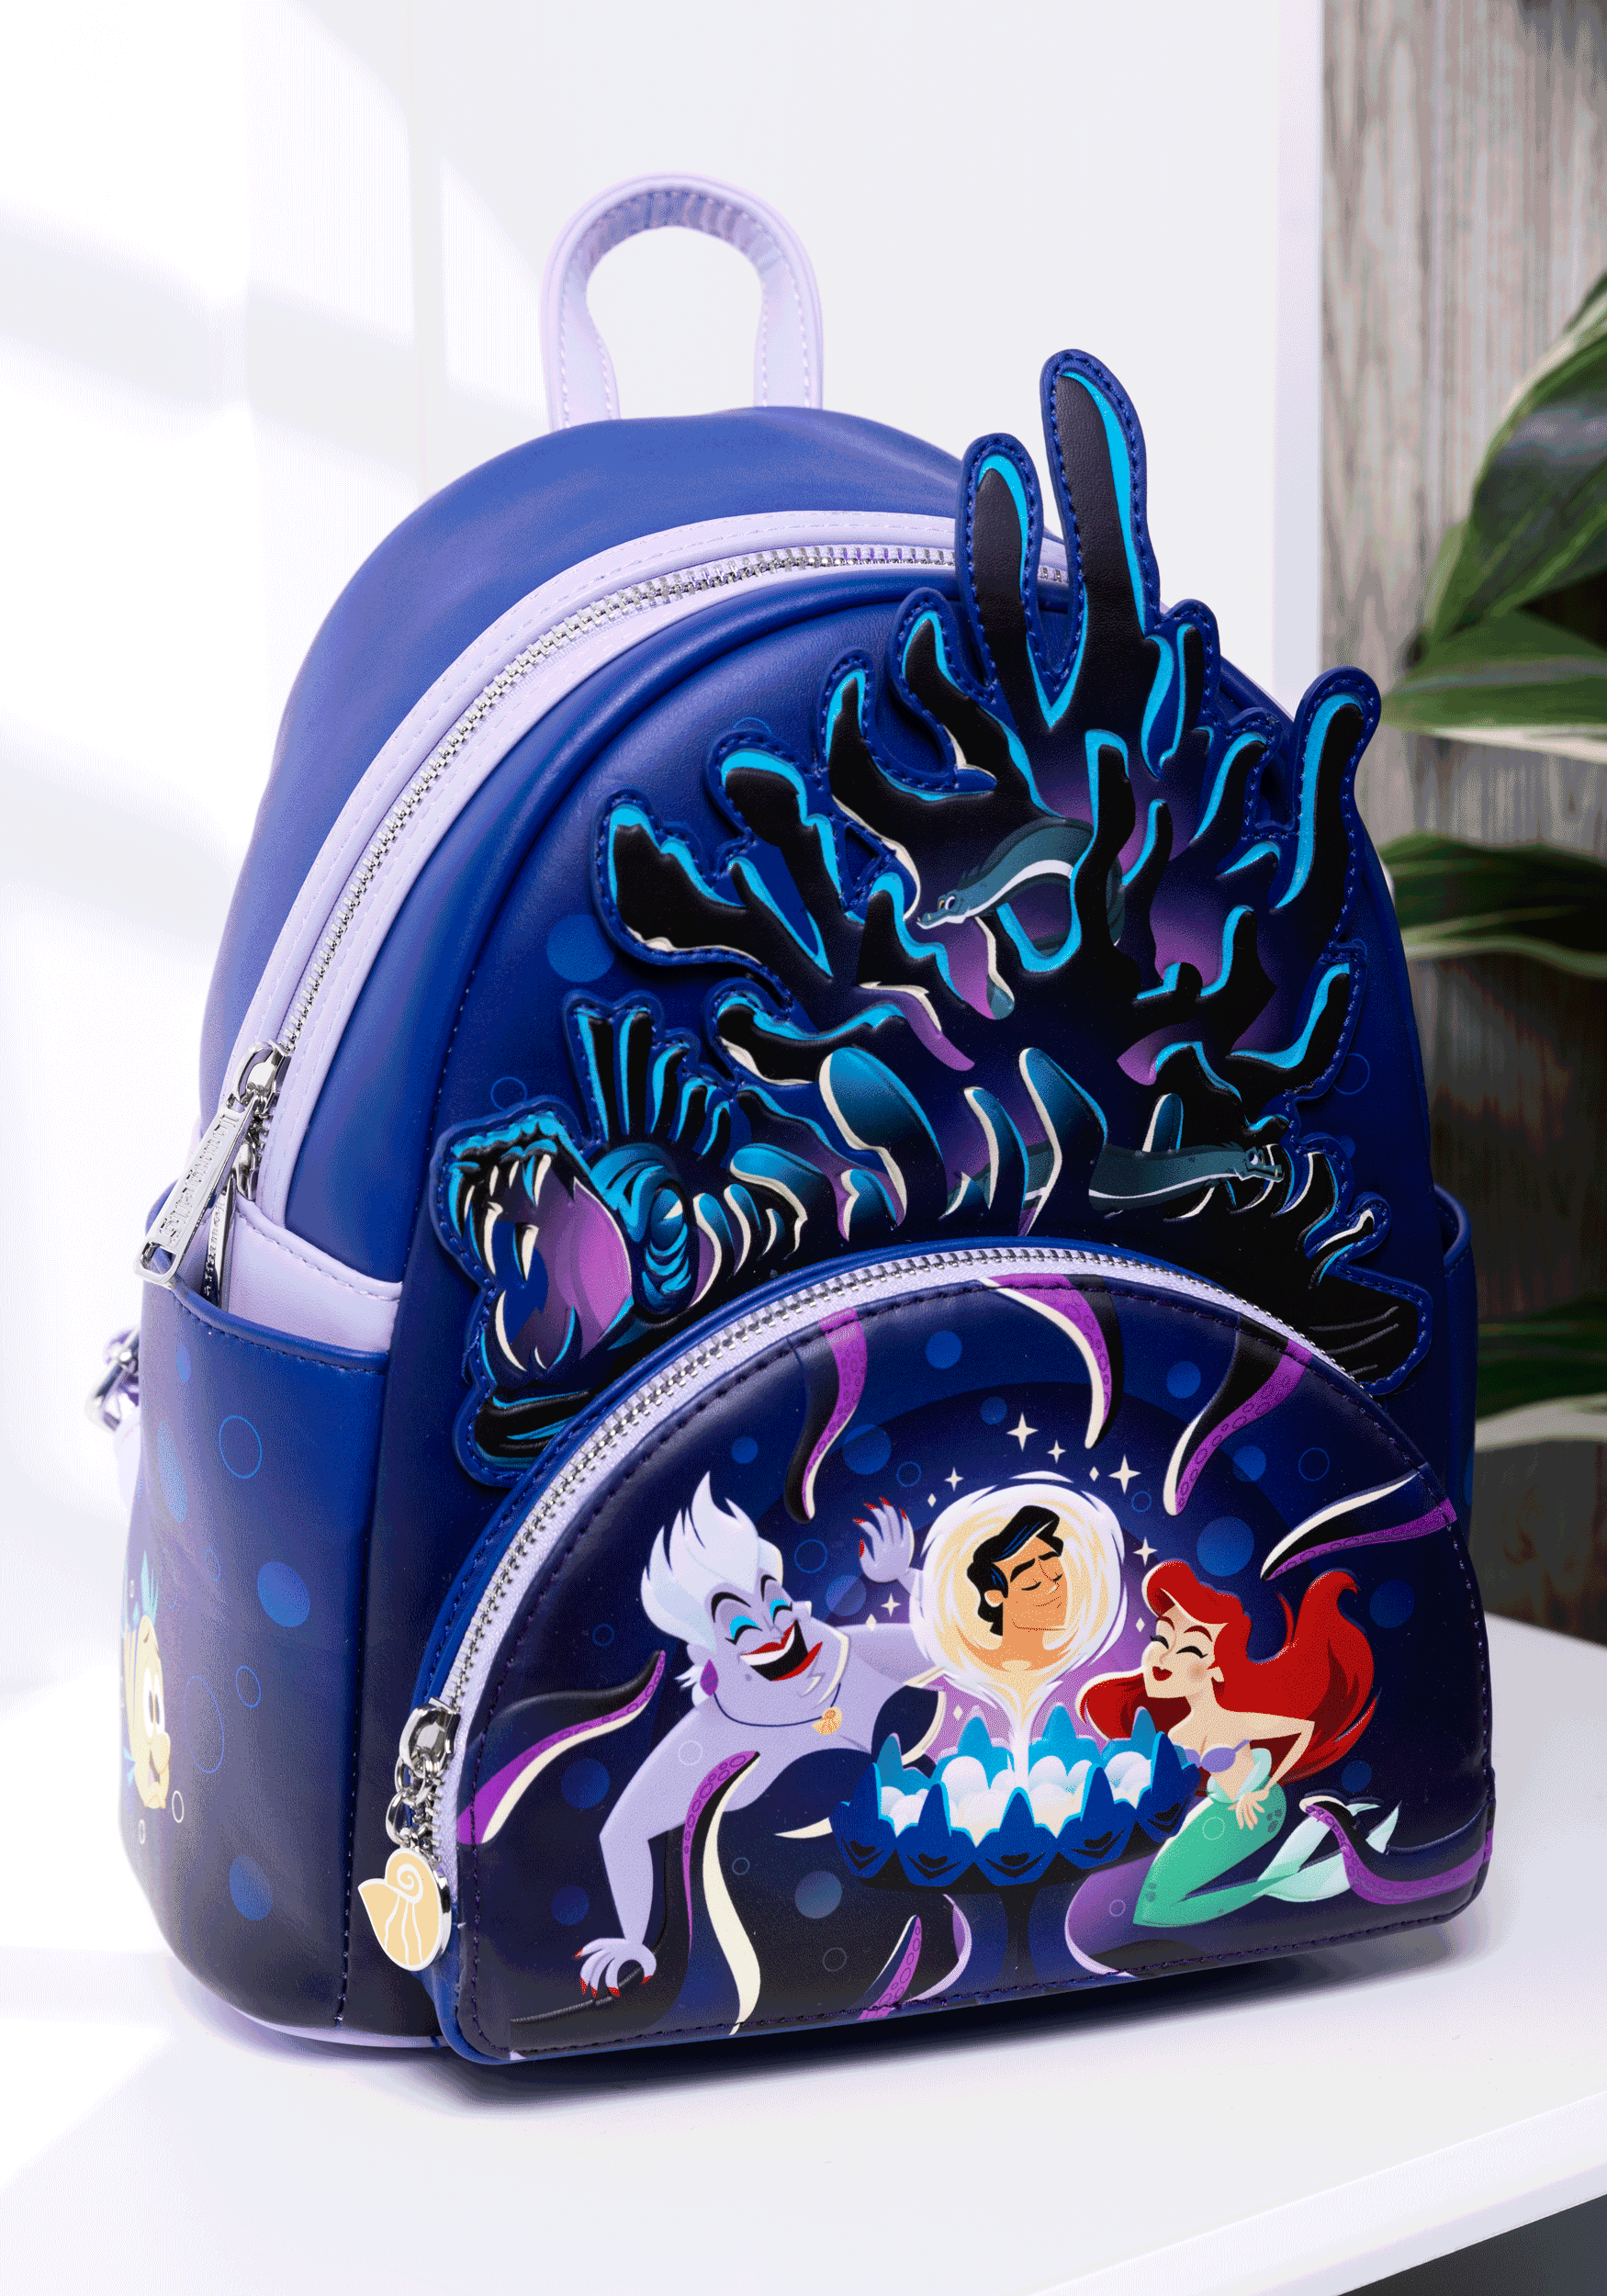 The Little Mermaid: Triton's Gift Loungefly Mini Backpack